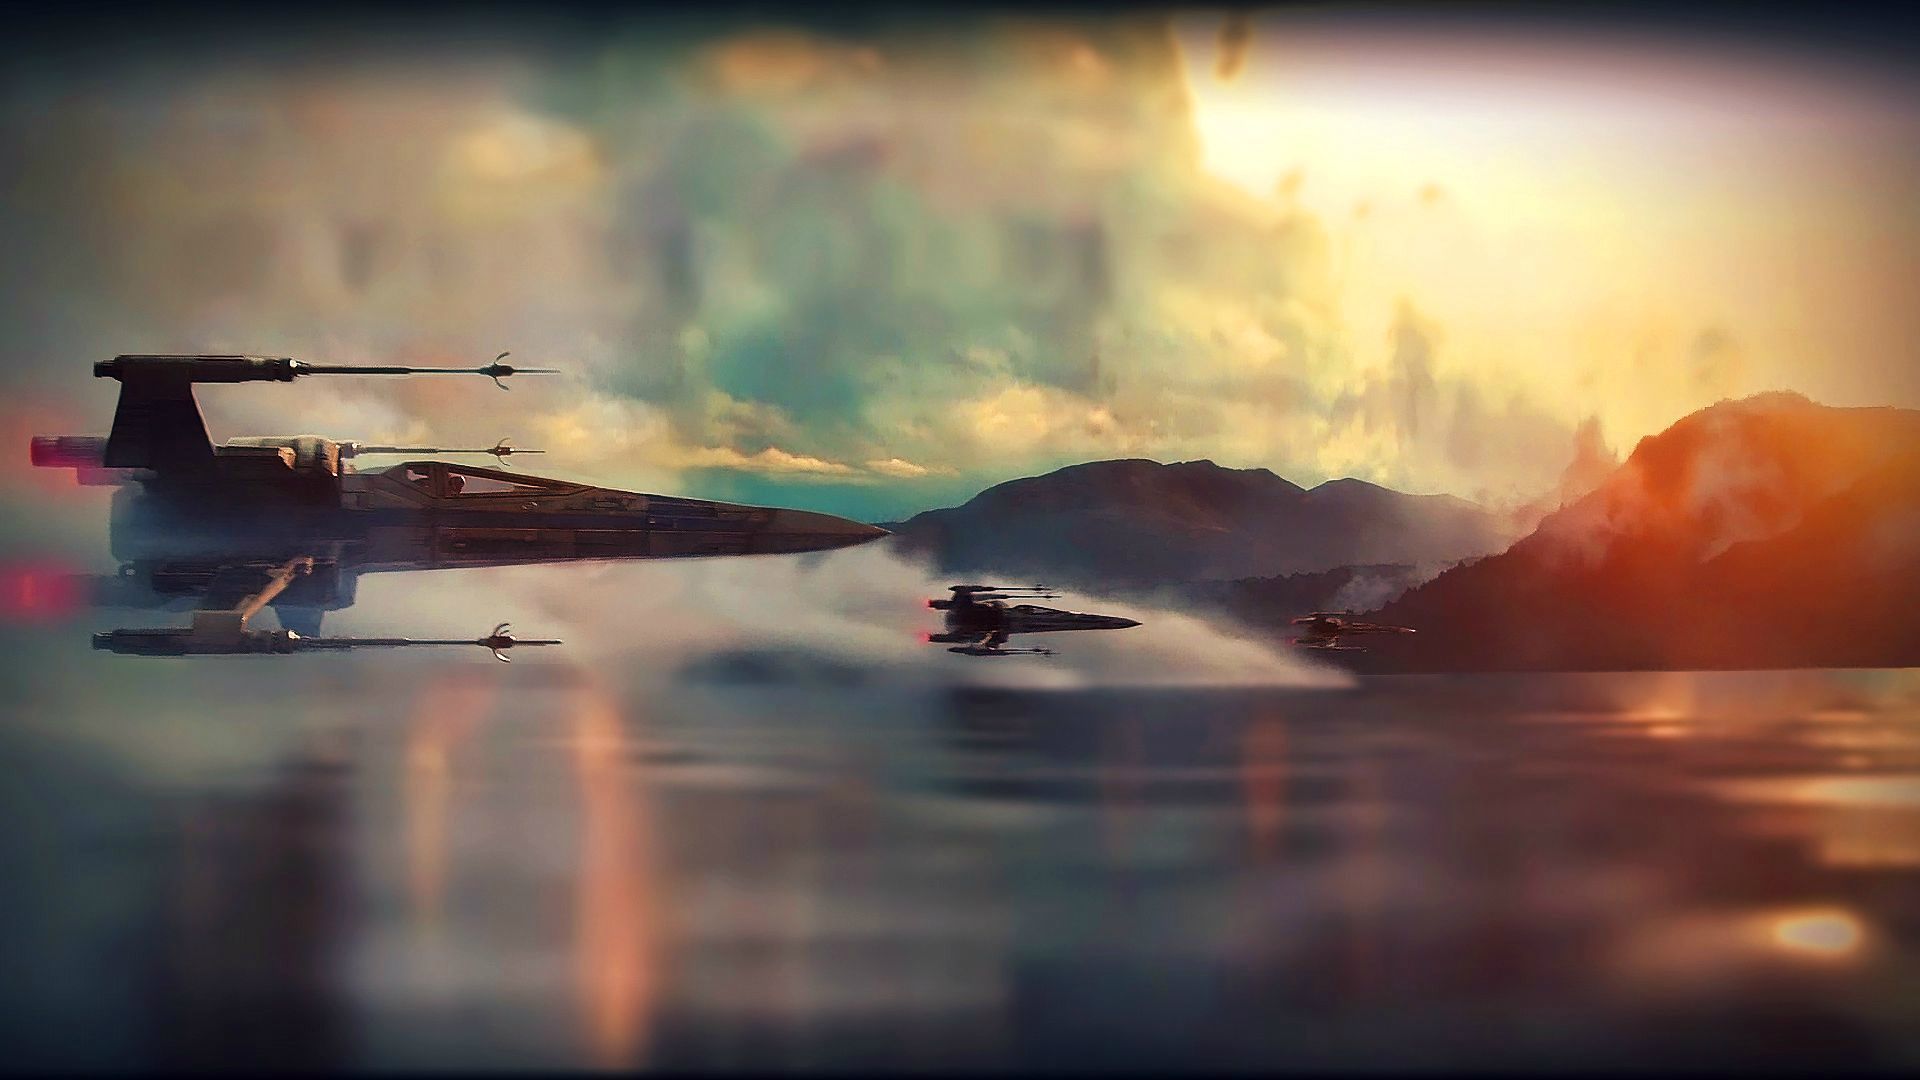 142 Star Wars Episode VII The Force Awakens HD Wallpapers